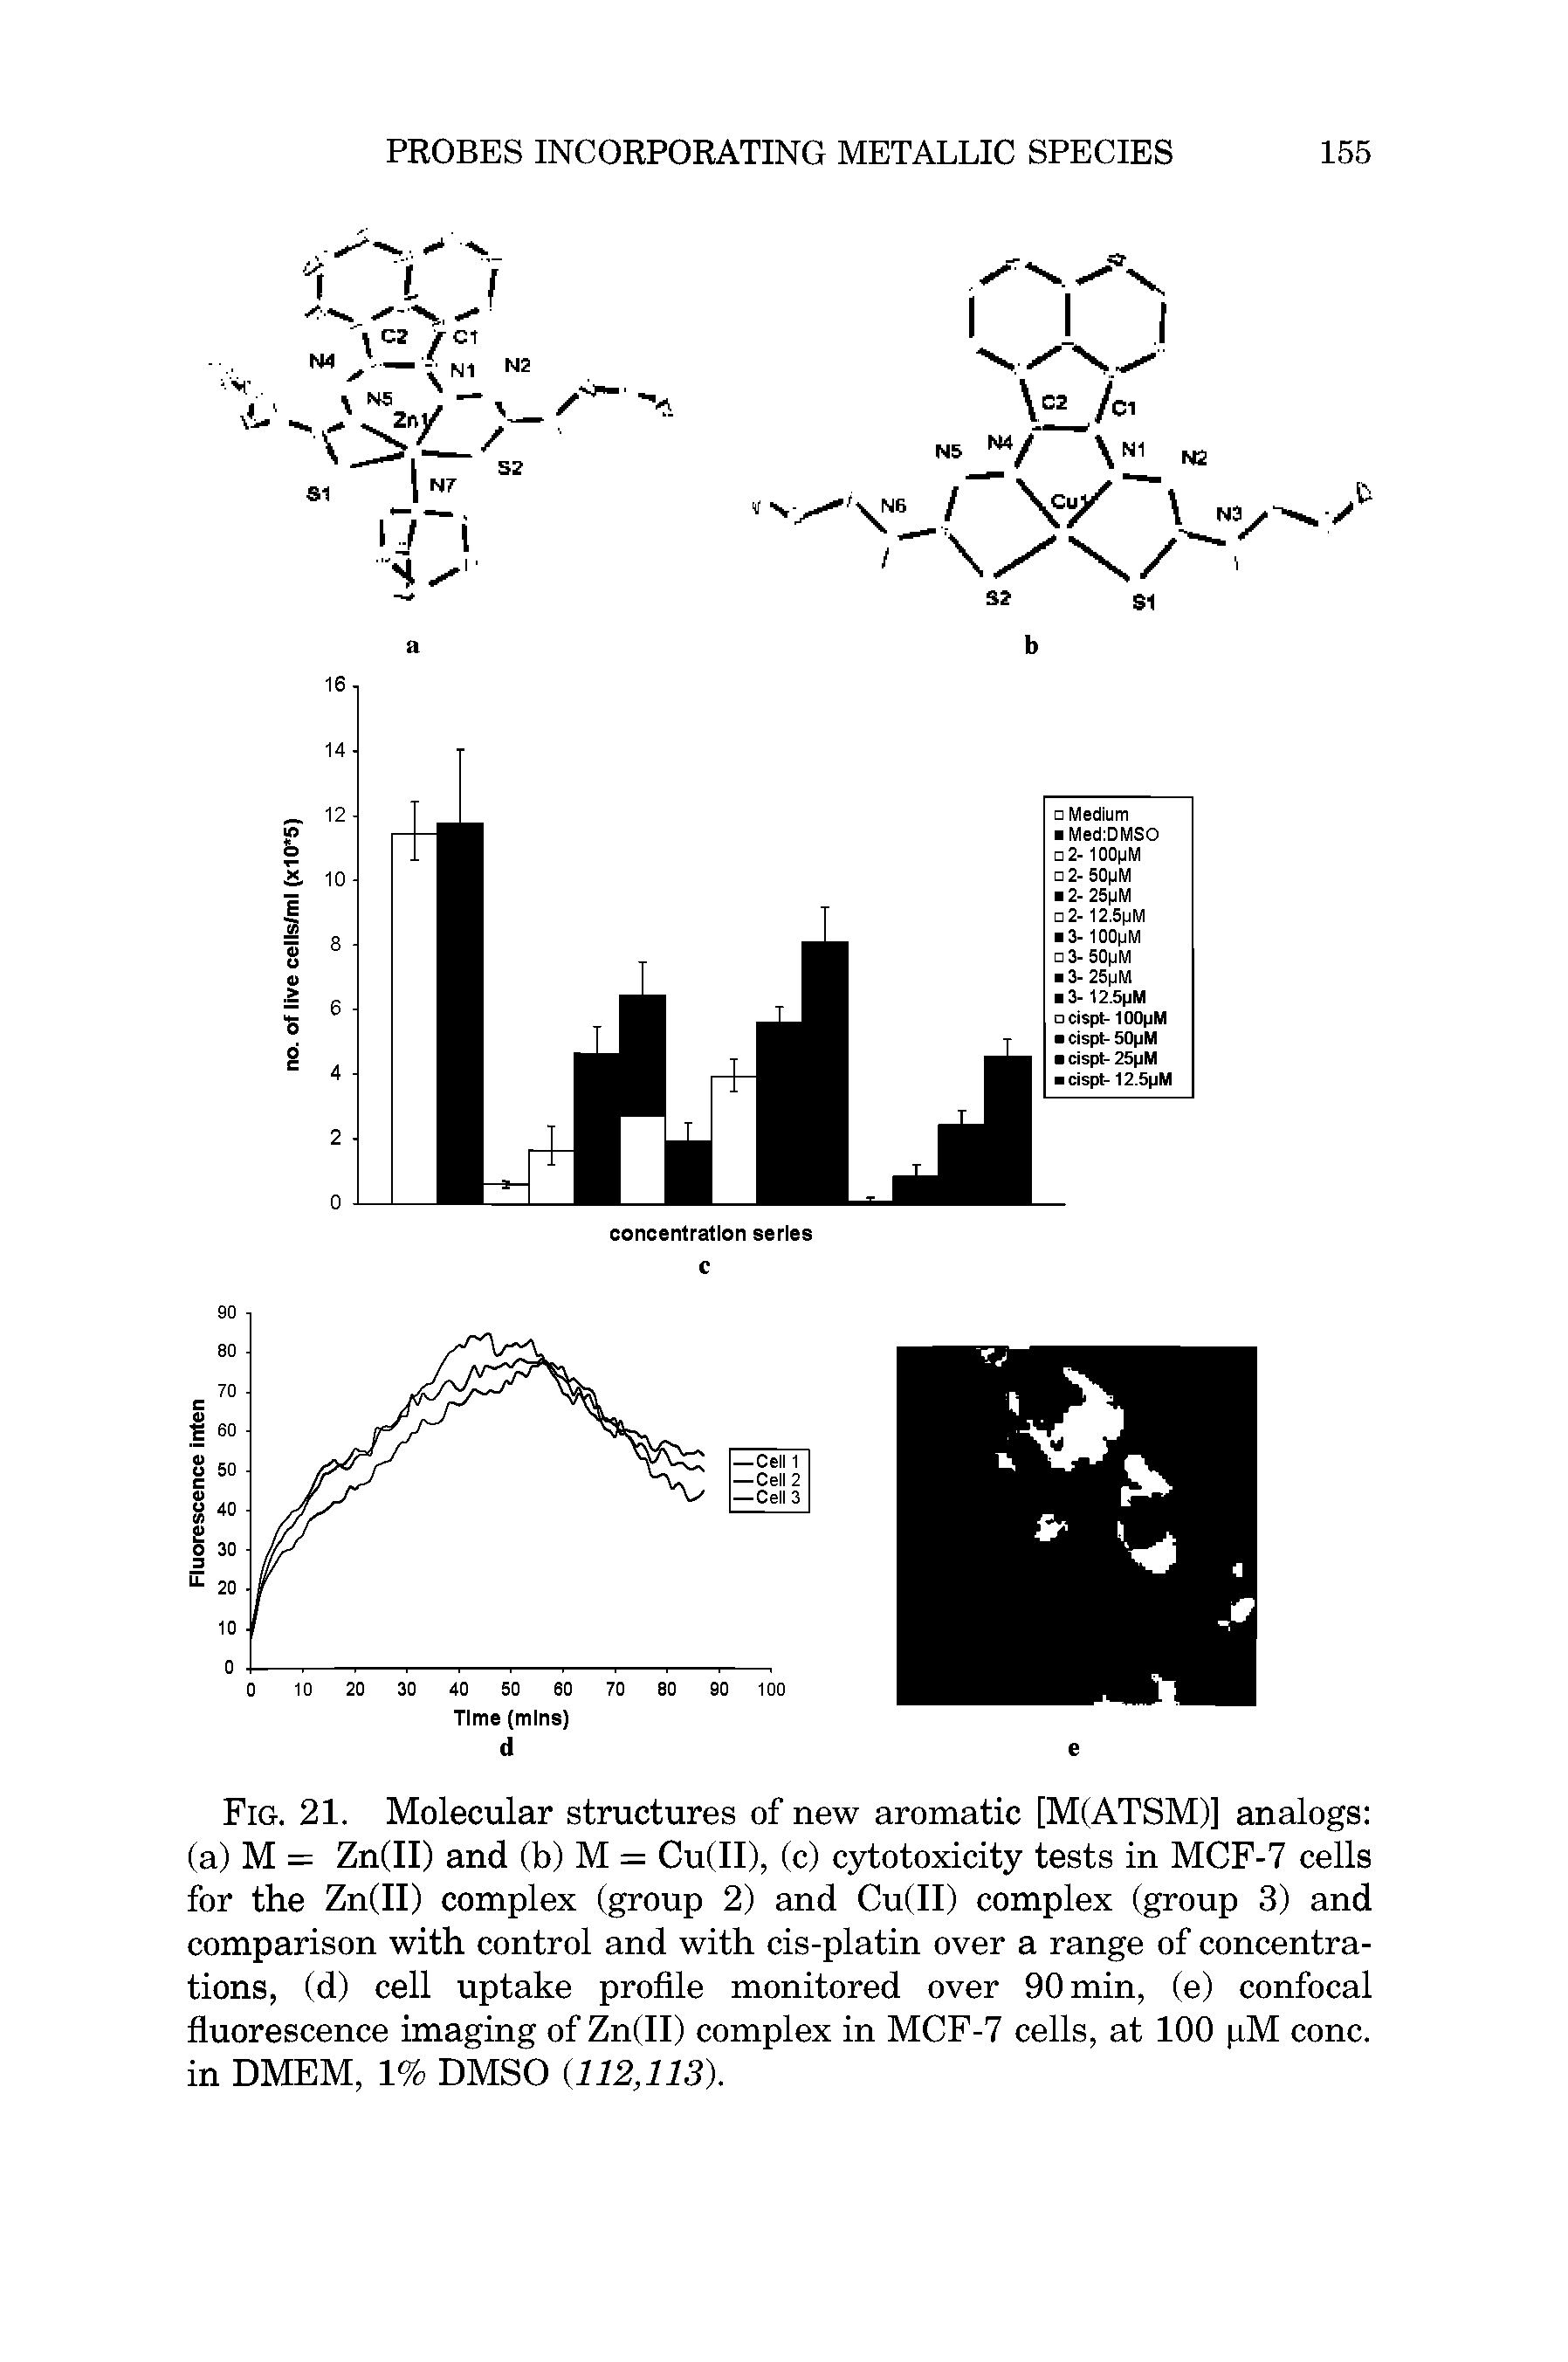 Fig. 21. Molecular structures of new aromatic [M(ATSM)] analogs (a) M — Zn(II) and (b) M = Cu(II), (c) cytotoxicity tests in MCF-7 cells for the Zn(II) complex (group 2) and Cu(II) complex (group 3) and comparison with control and with cis-platin over a range of concentrations, (d) cell uptake profile monitored over 90 min, (e) confocal fluorescence imaging of Zn(II) complex in MCF-7 cells, at 100 pM cone, in DMEM, 1% DMSO (112,113).